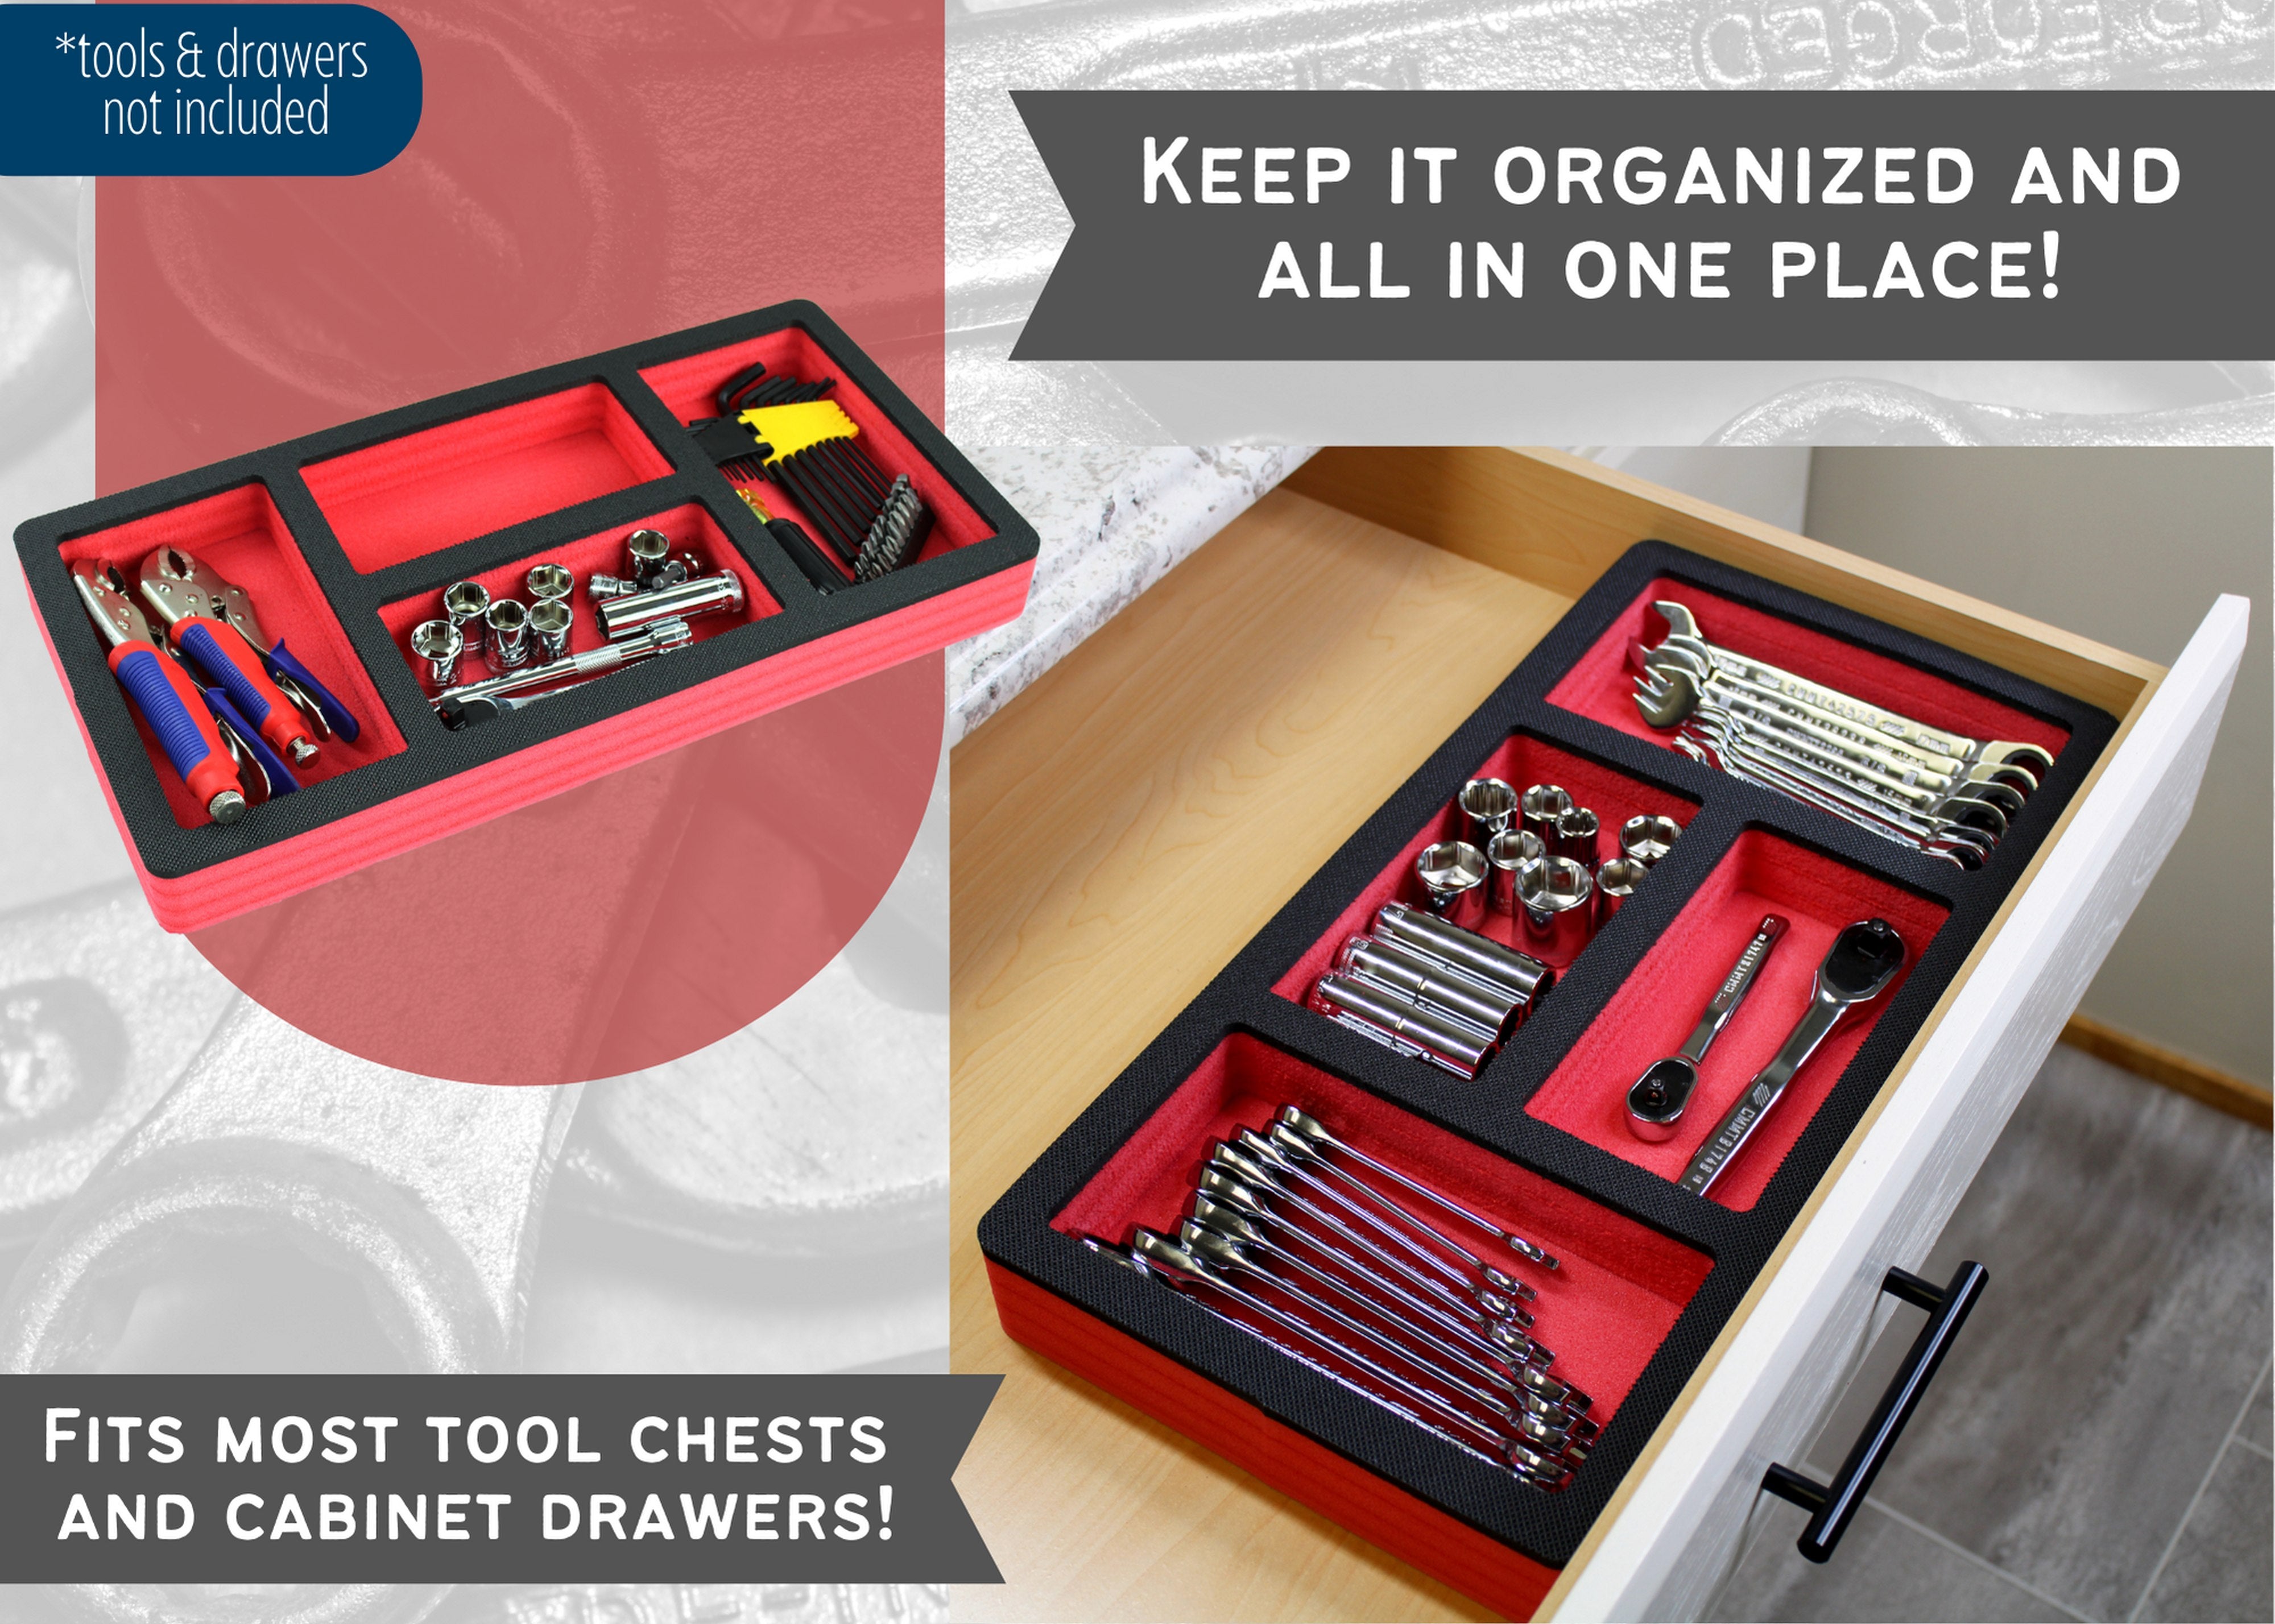 Tool Drawer Organizer Insert Red and Black Durable Foam Strong Non-Slip Anti-Rattle Bin Holder Tray 20 x 10 Inches 4 Large Pockets Fits Craftsman Husky Kobalt Milwaukee and Many Others